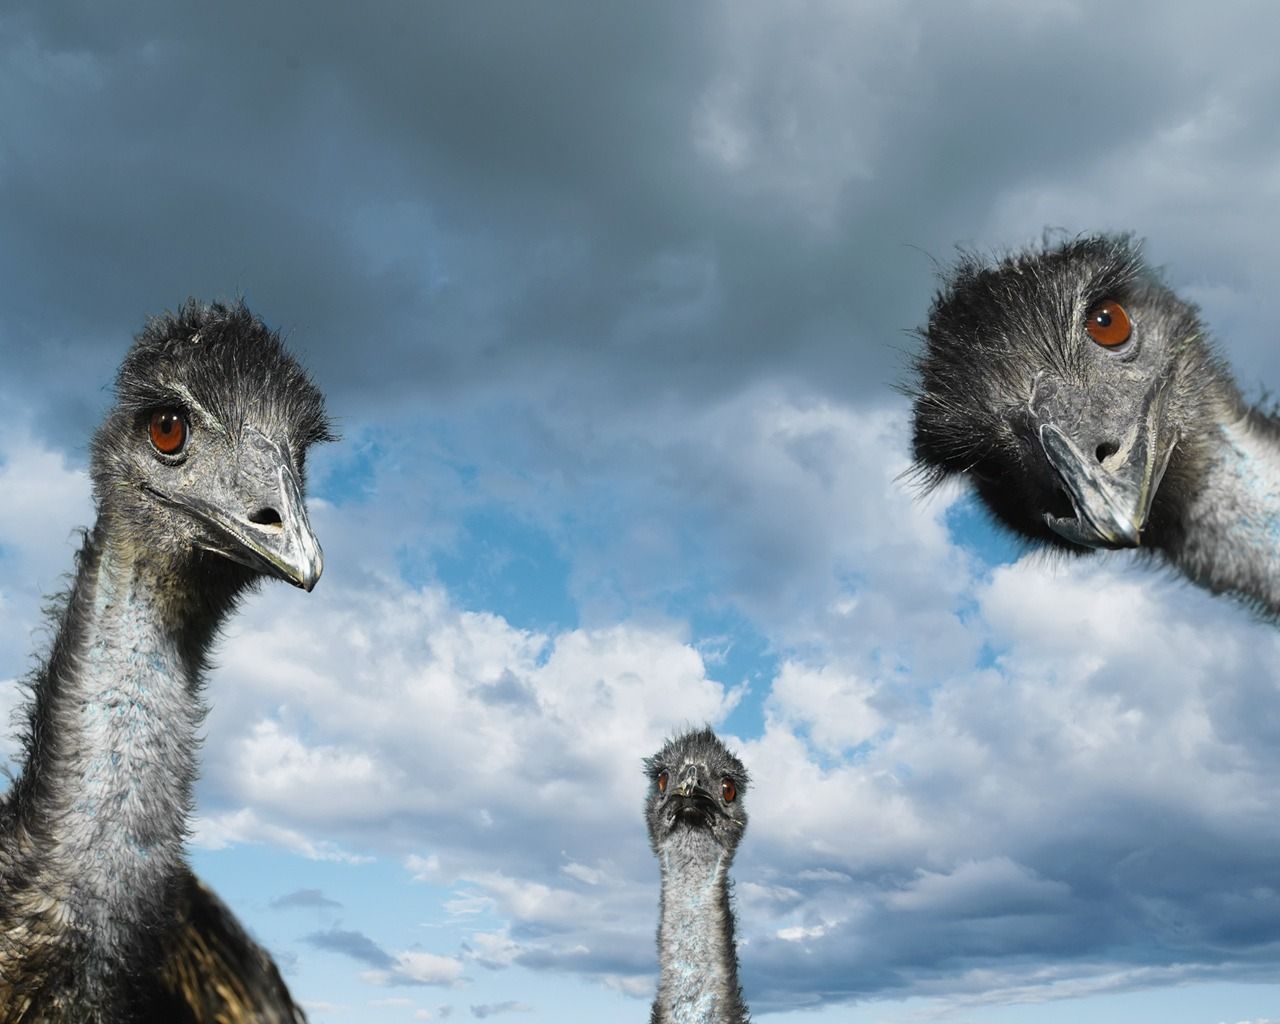 Cute Cartoon Ostrich Wallpaper Background Wallpaper Image For Free Download   Pngtree